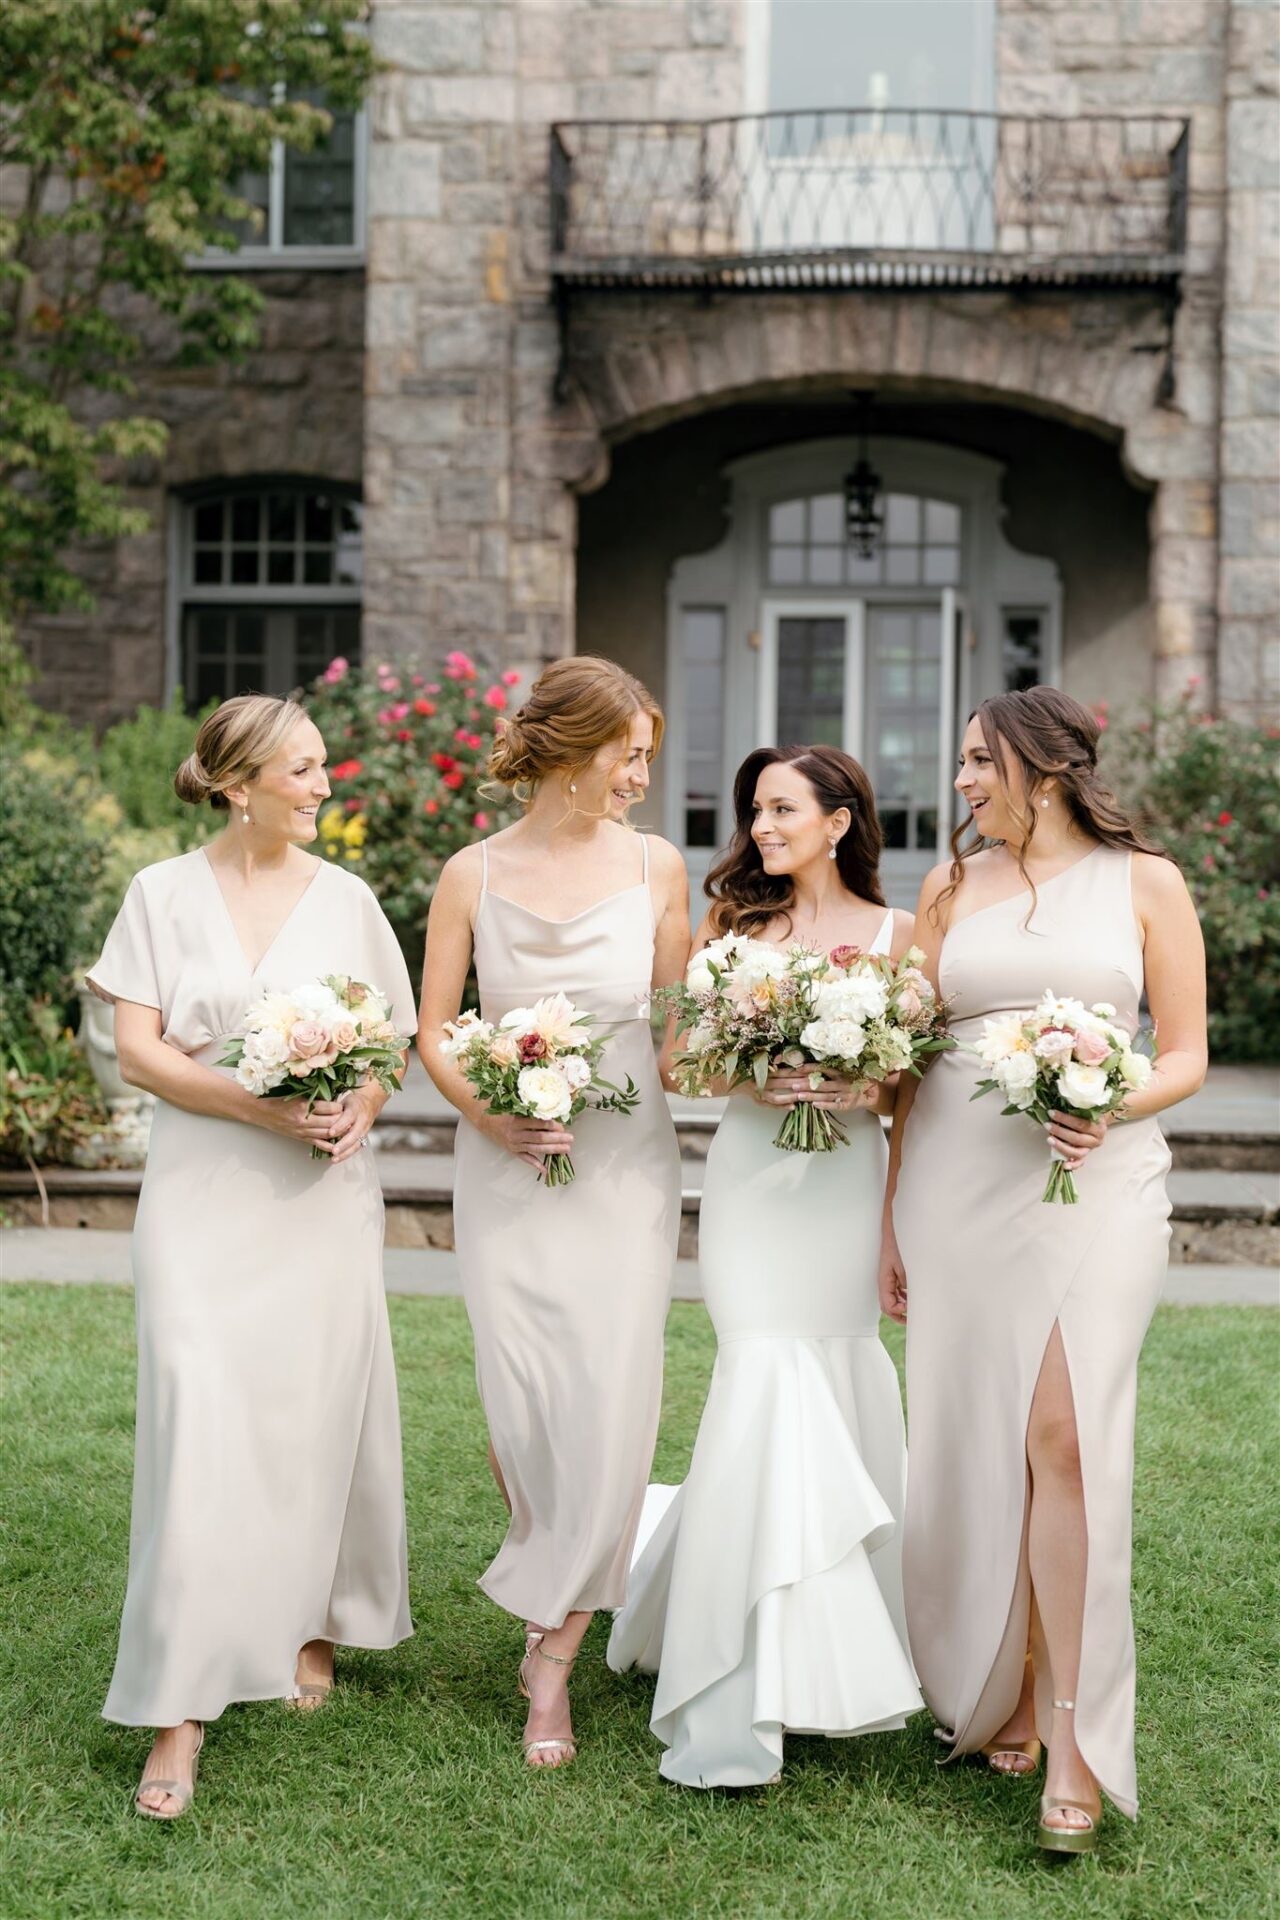 Creating the Perfect Bridal Look: How Makeup Artists and Hair Stylists Work as a Team